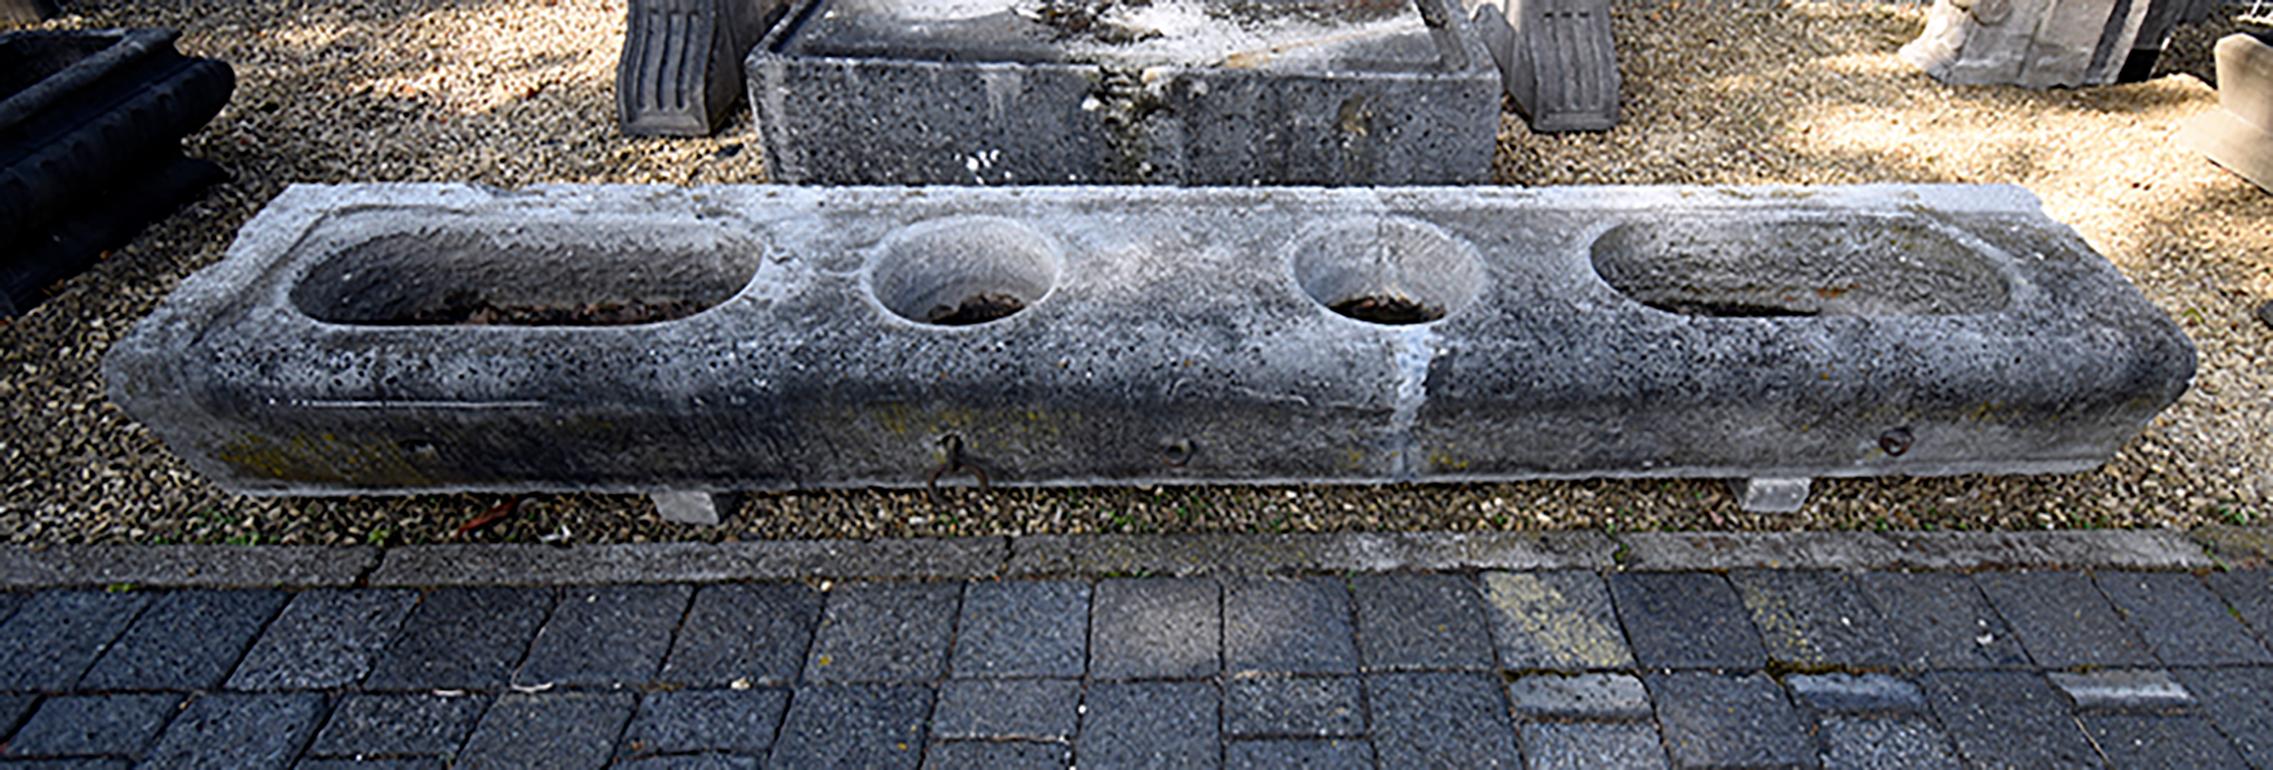 This antique Belgian bluestone horse trough 19th century comes
from a Belgian farm where horses used it to drink out of.
It still has the original hooks to tie up the horses.